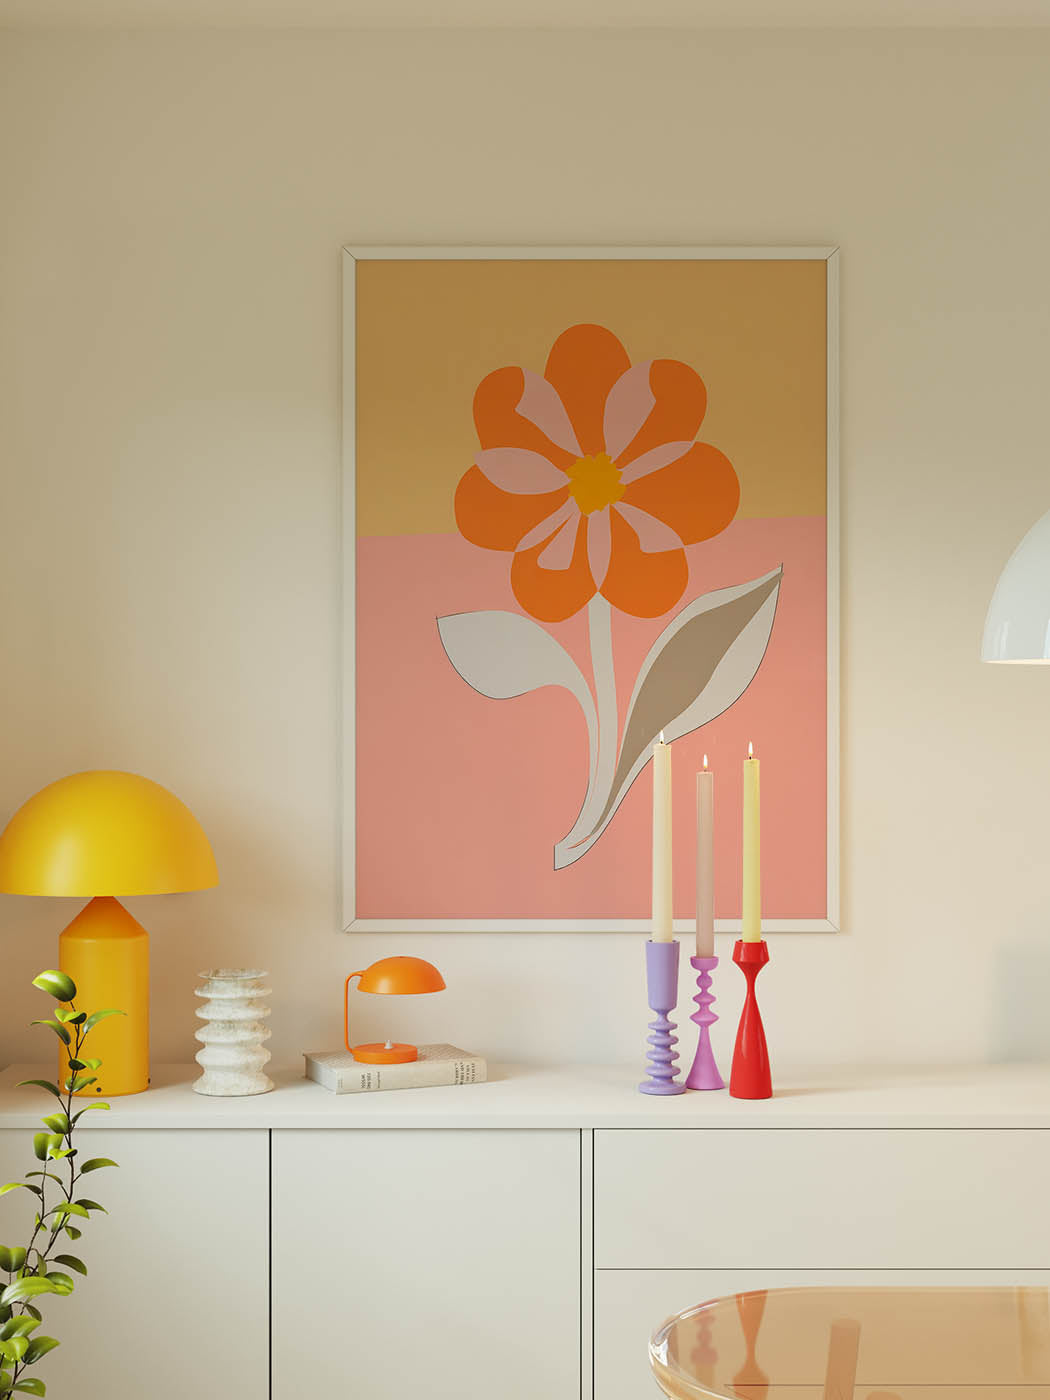 Illustration of a vibrant orange and pink flower with a beige background, ideal for contemporary home decor.